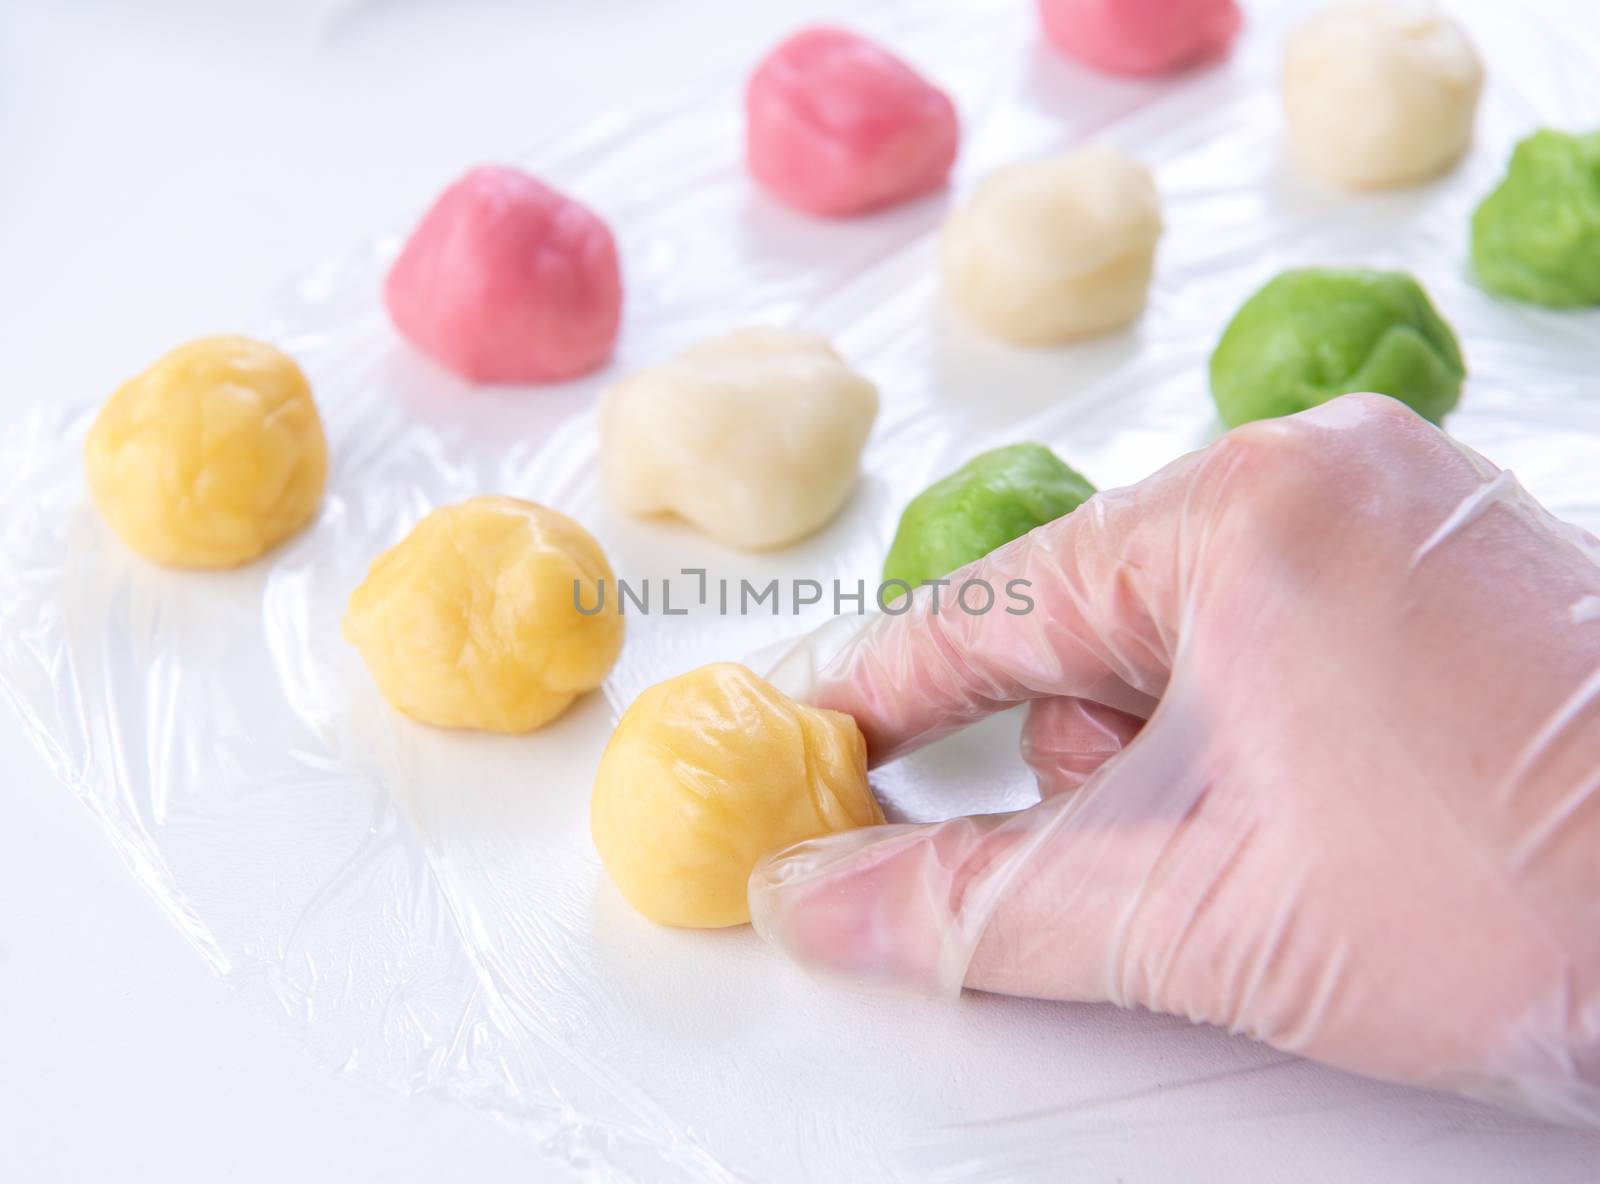 Young woman is making colorful snow skin moon cake, recipe of sweet snowy mooncake, traditional savory dessert for Mid-Autumn Festival, close up, lifestyle.